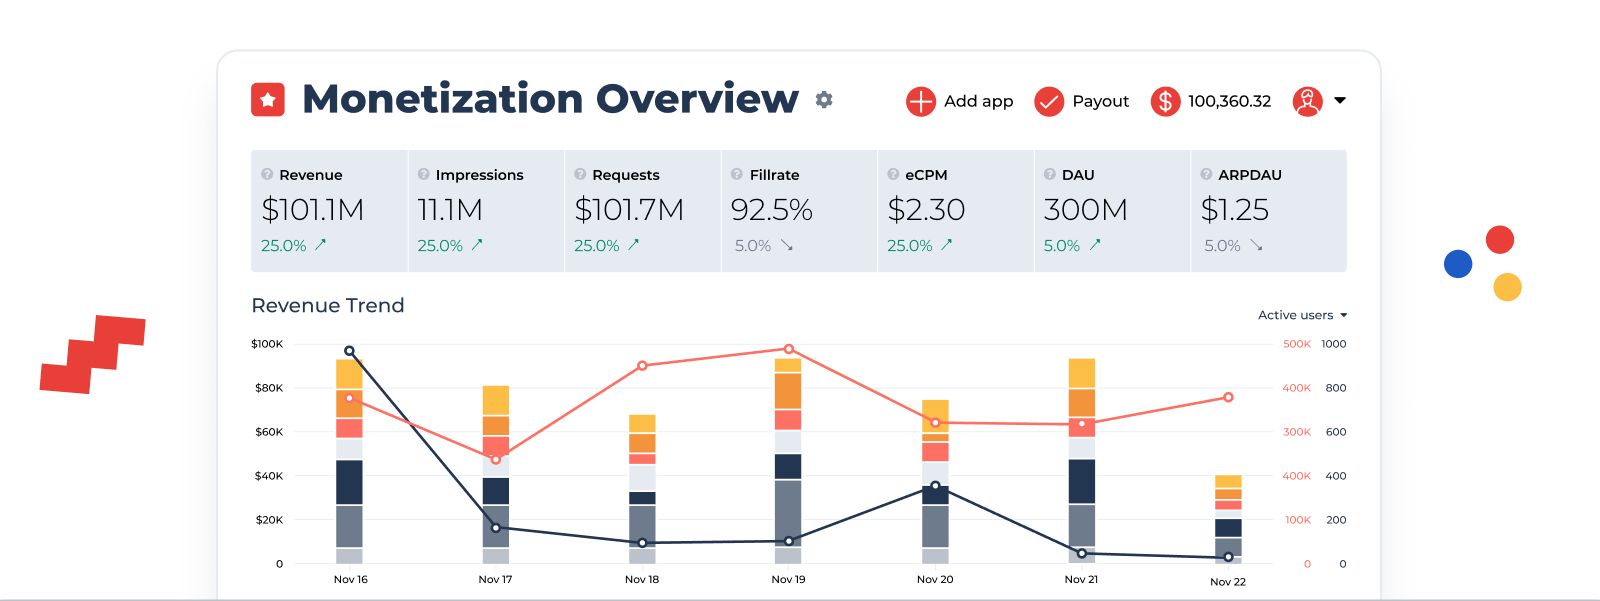 Appodeal's monetization dashboard overview